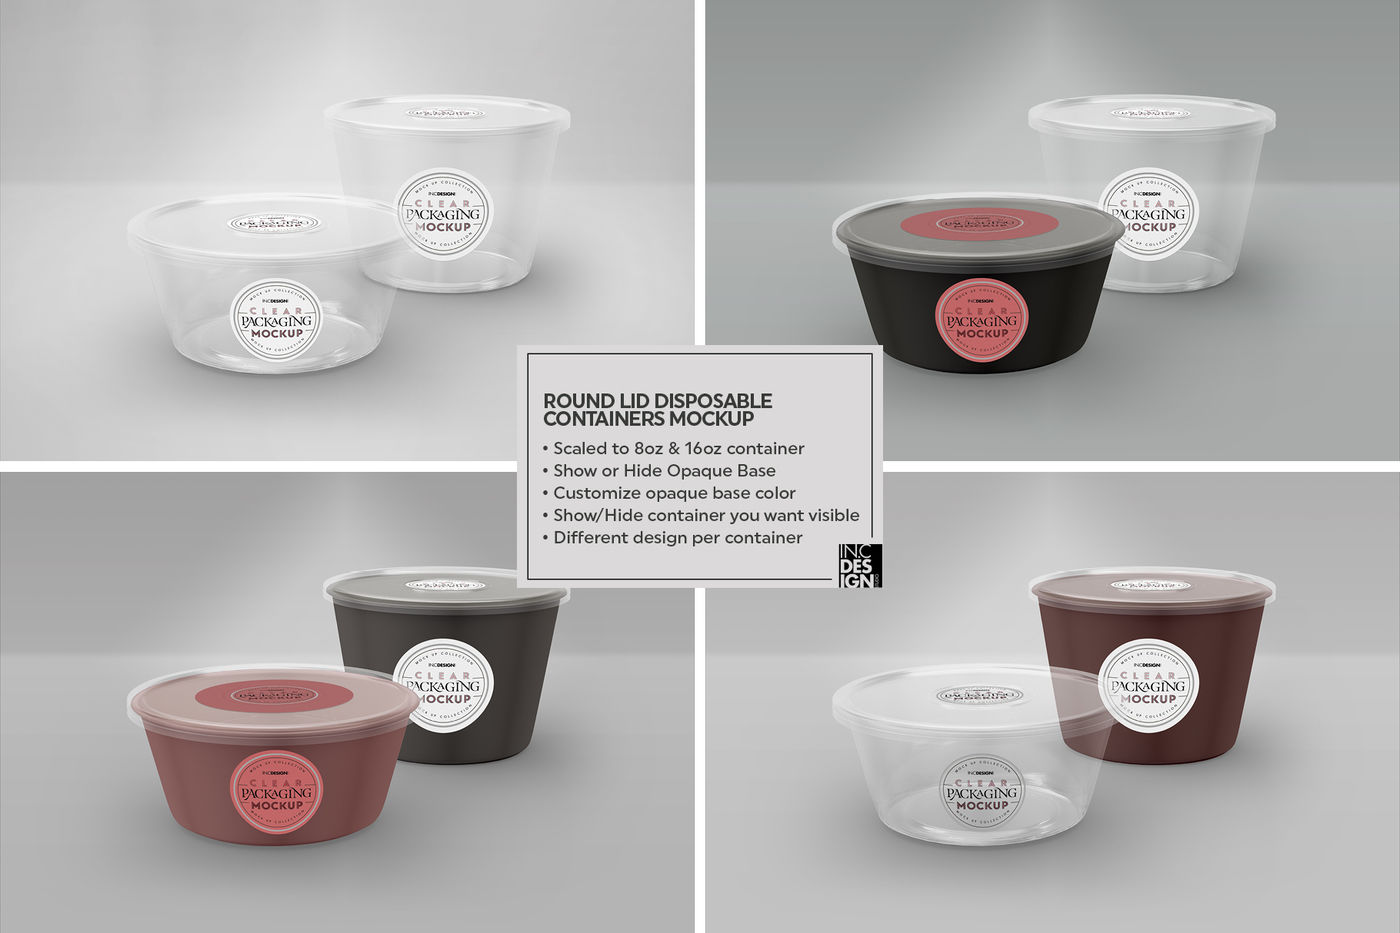 Download Vol.1: Clear Plastic Food Containers Packaging Mock Up Collection By INC Design Studio ...